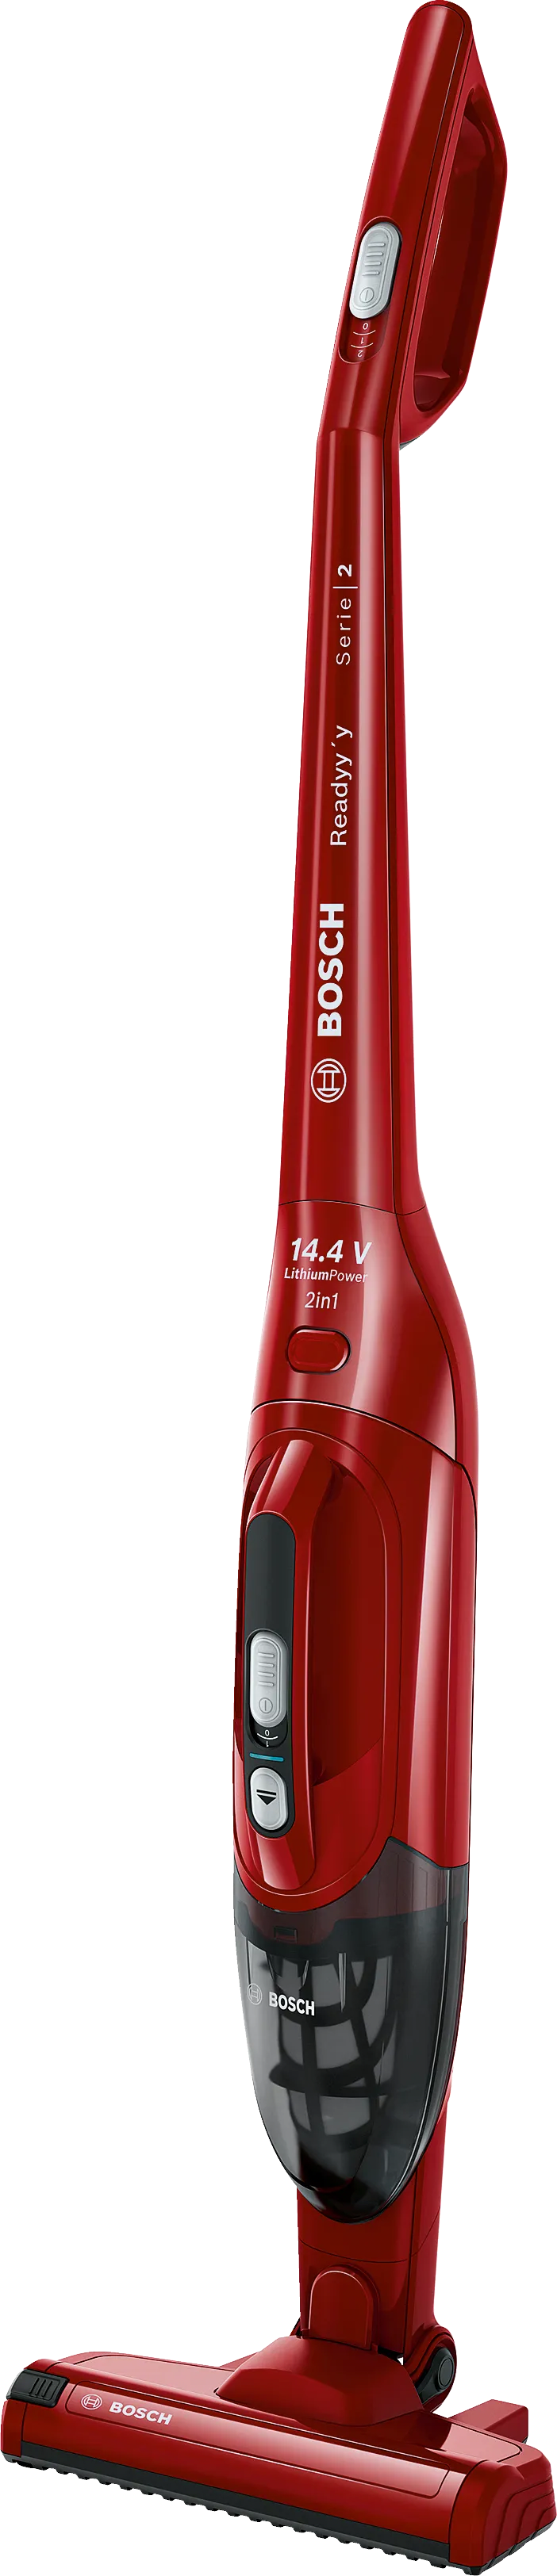 Series 2 Rechargeable vacuum cleaner Readyy'y 14.4V Red 